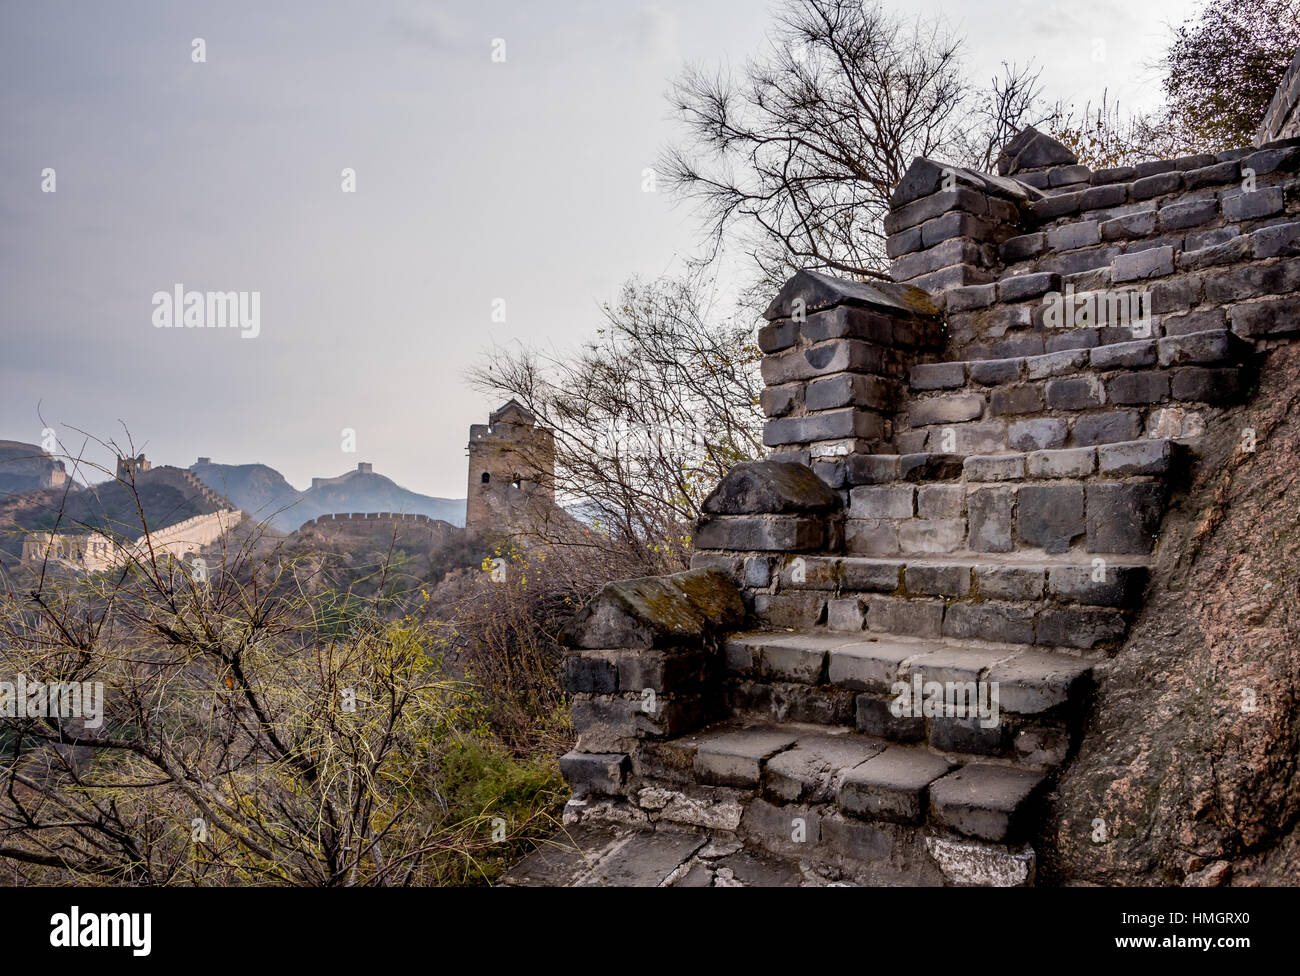 Time-worn stair steps at the Great Wall of China, Jinshanling section,  which was mostly built during the Ming Dynasty; no people in view. Stock Photo